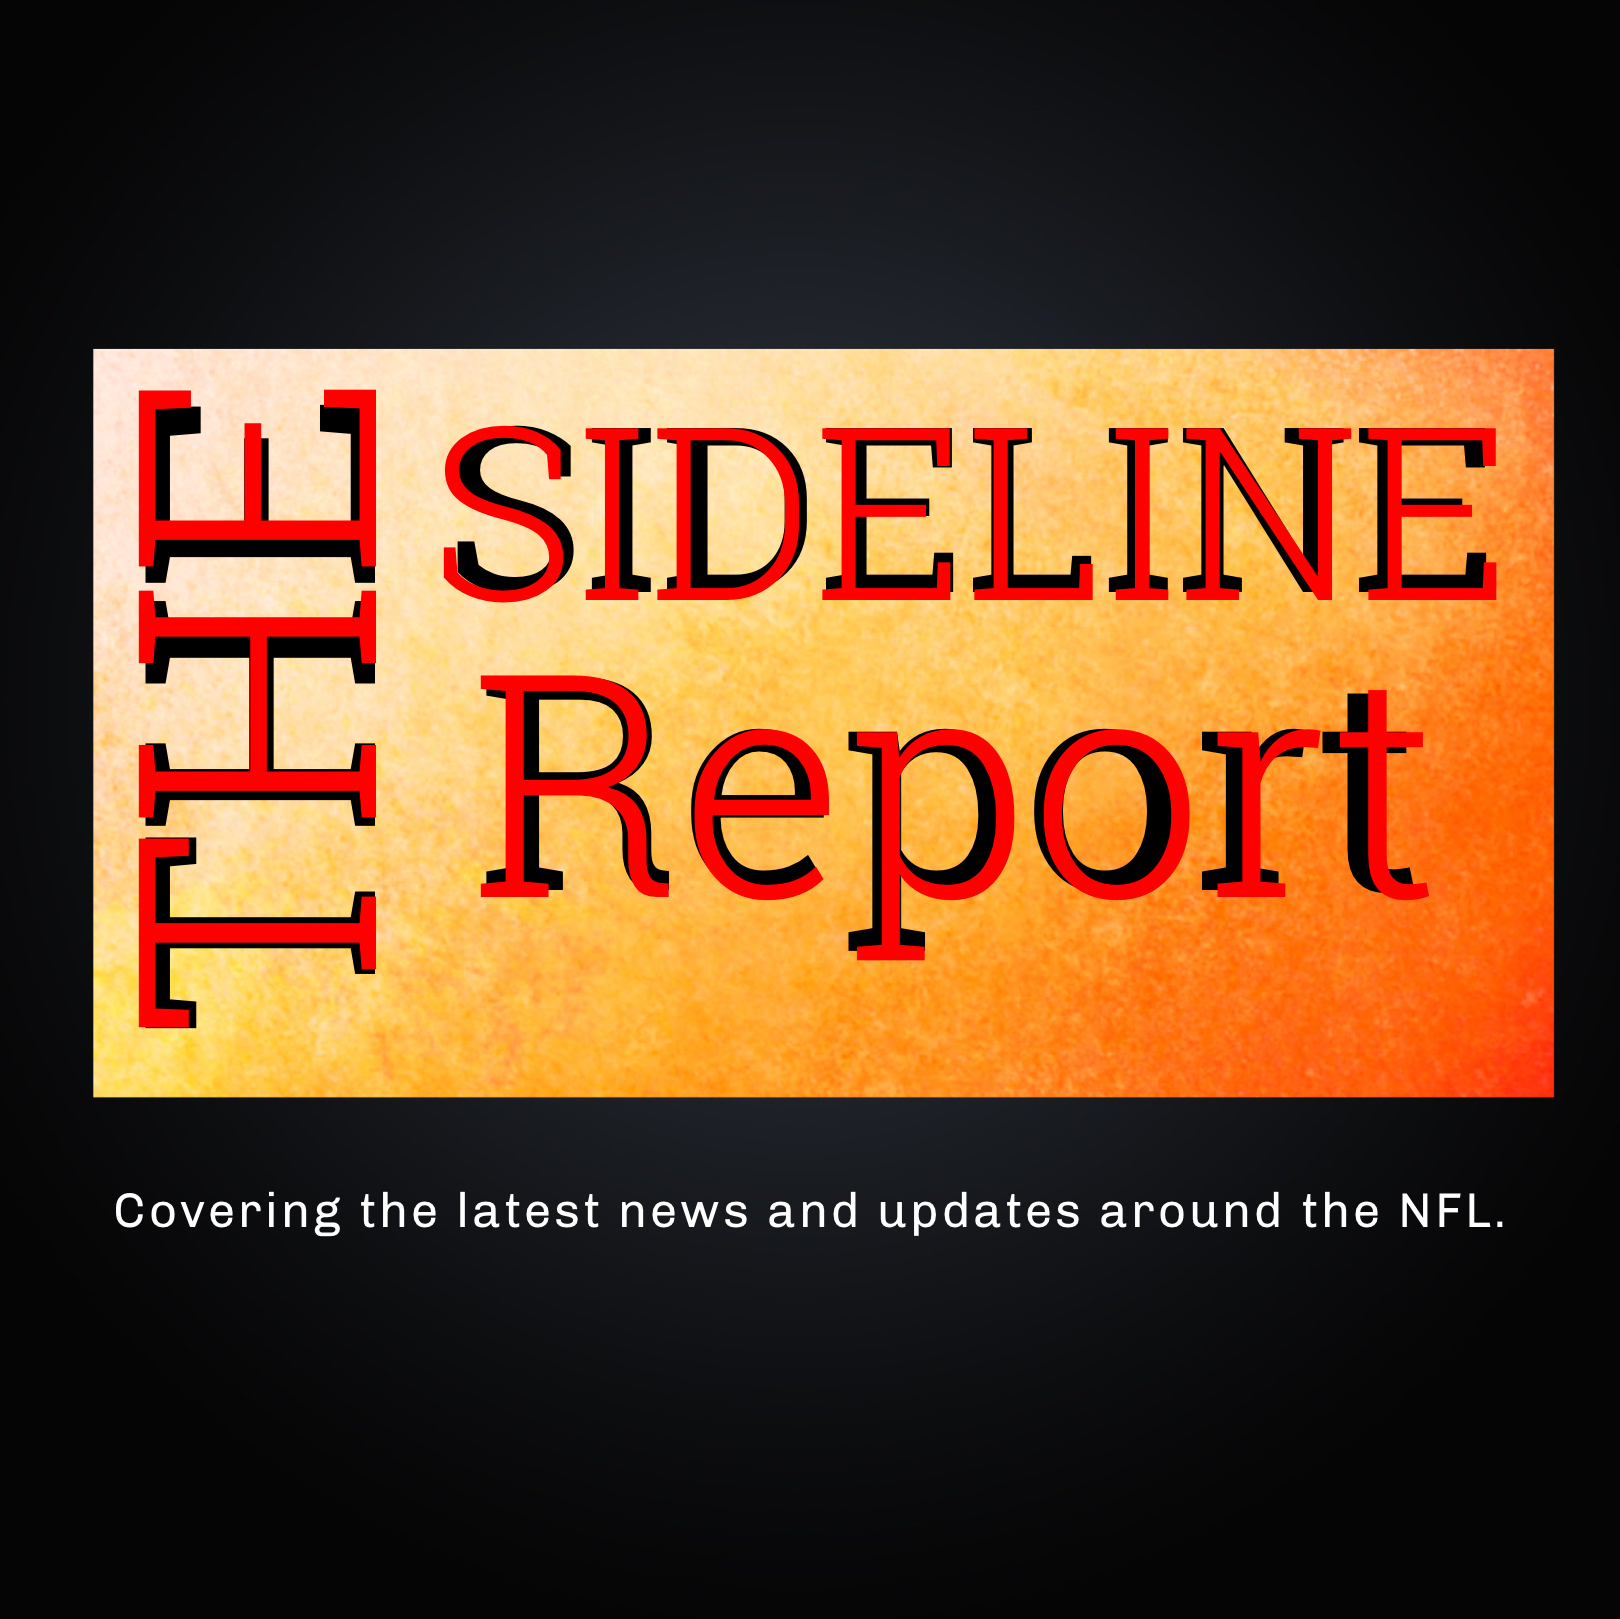 The Sideline Report